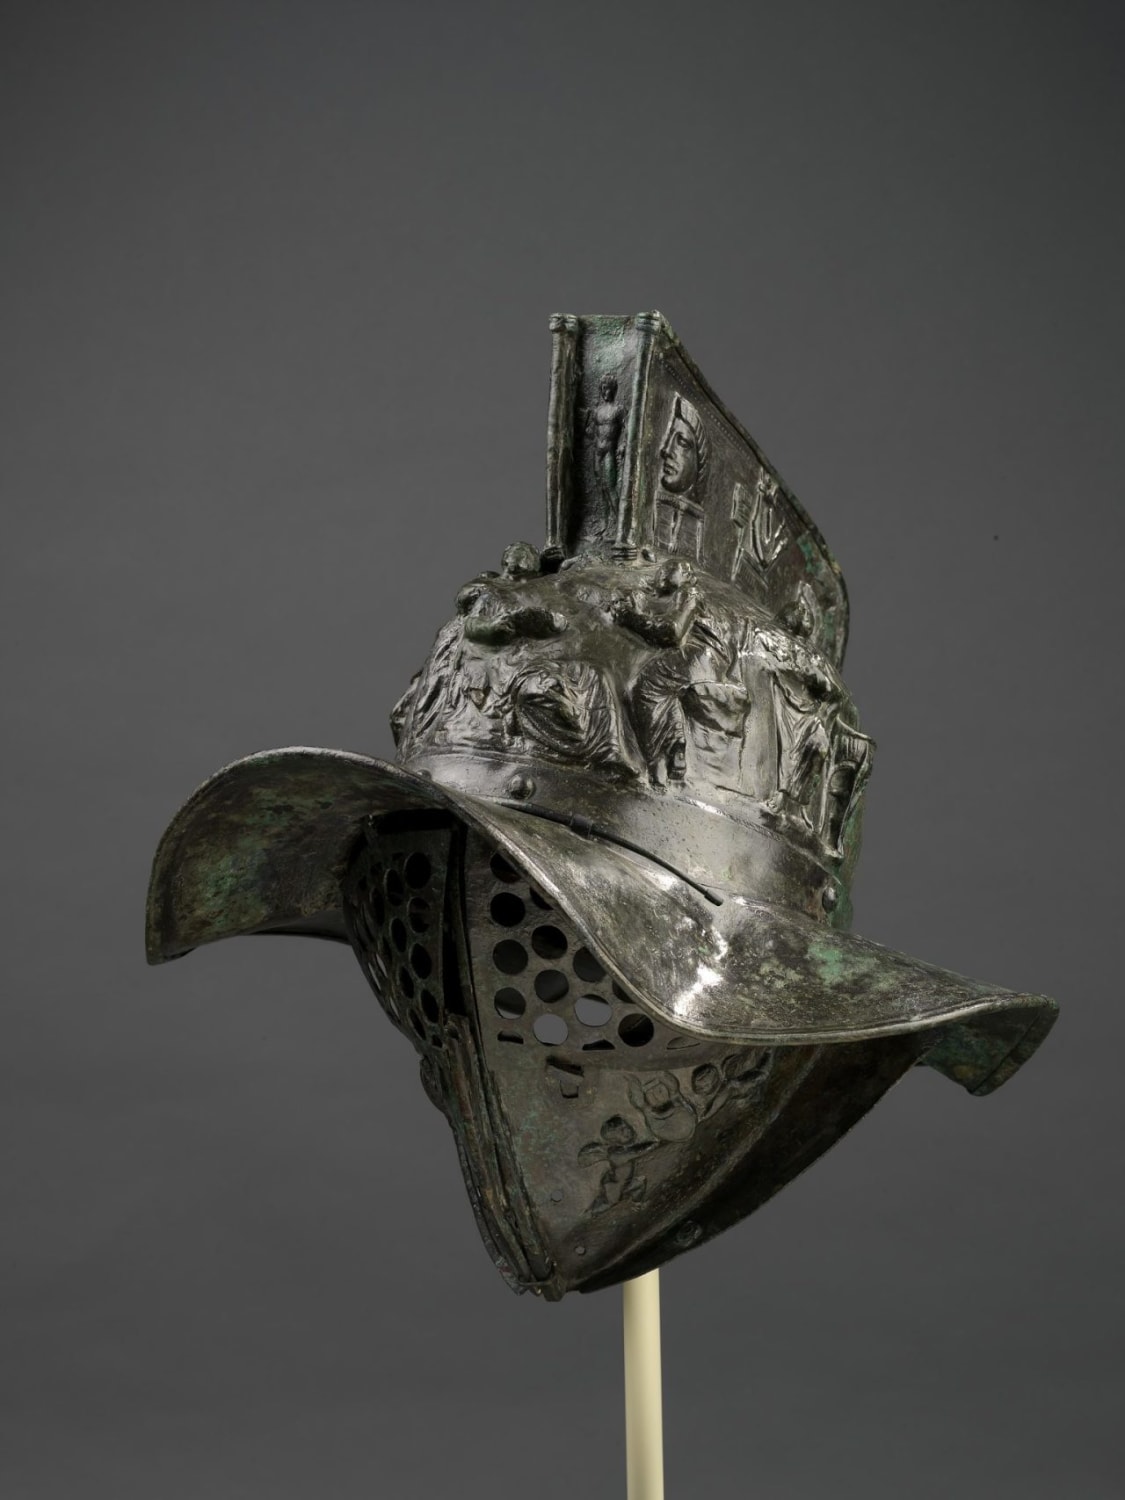 Authentic Gladiatorial Helmet unearthed at the Arena in Pompeii. 79 AD.